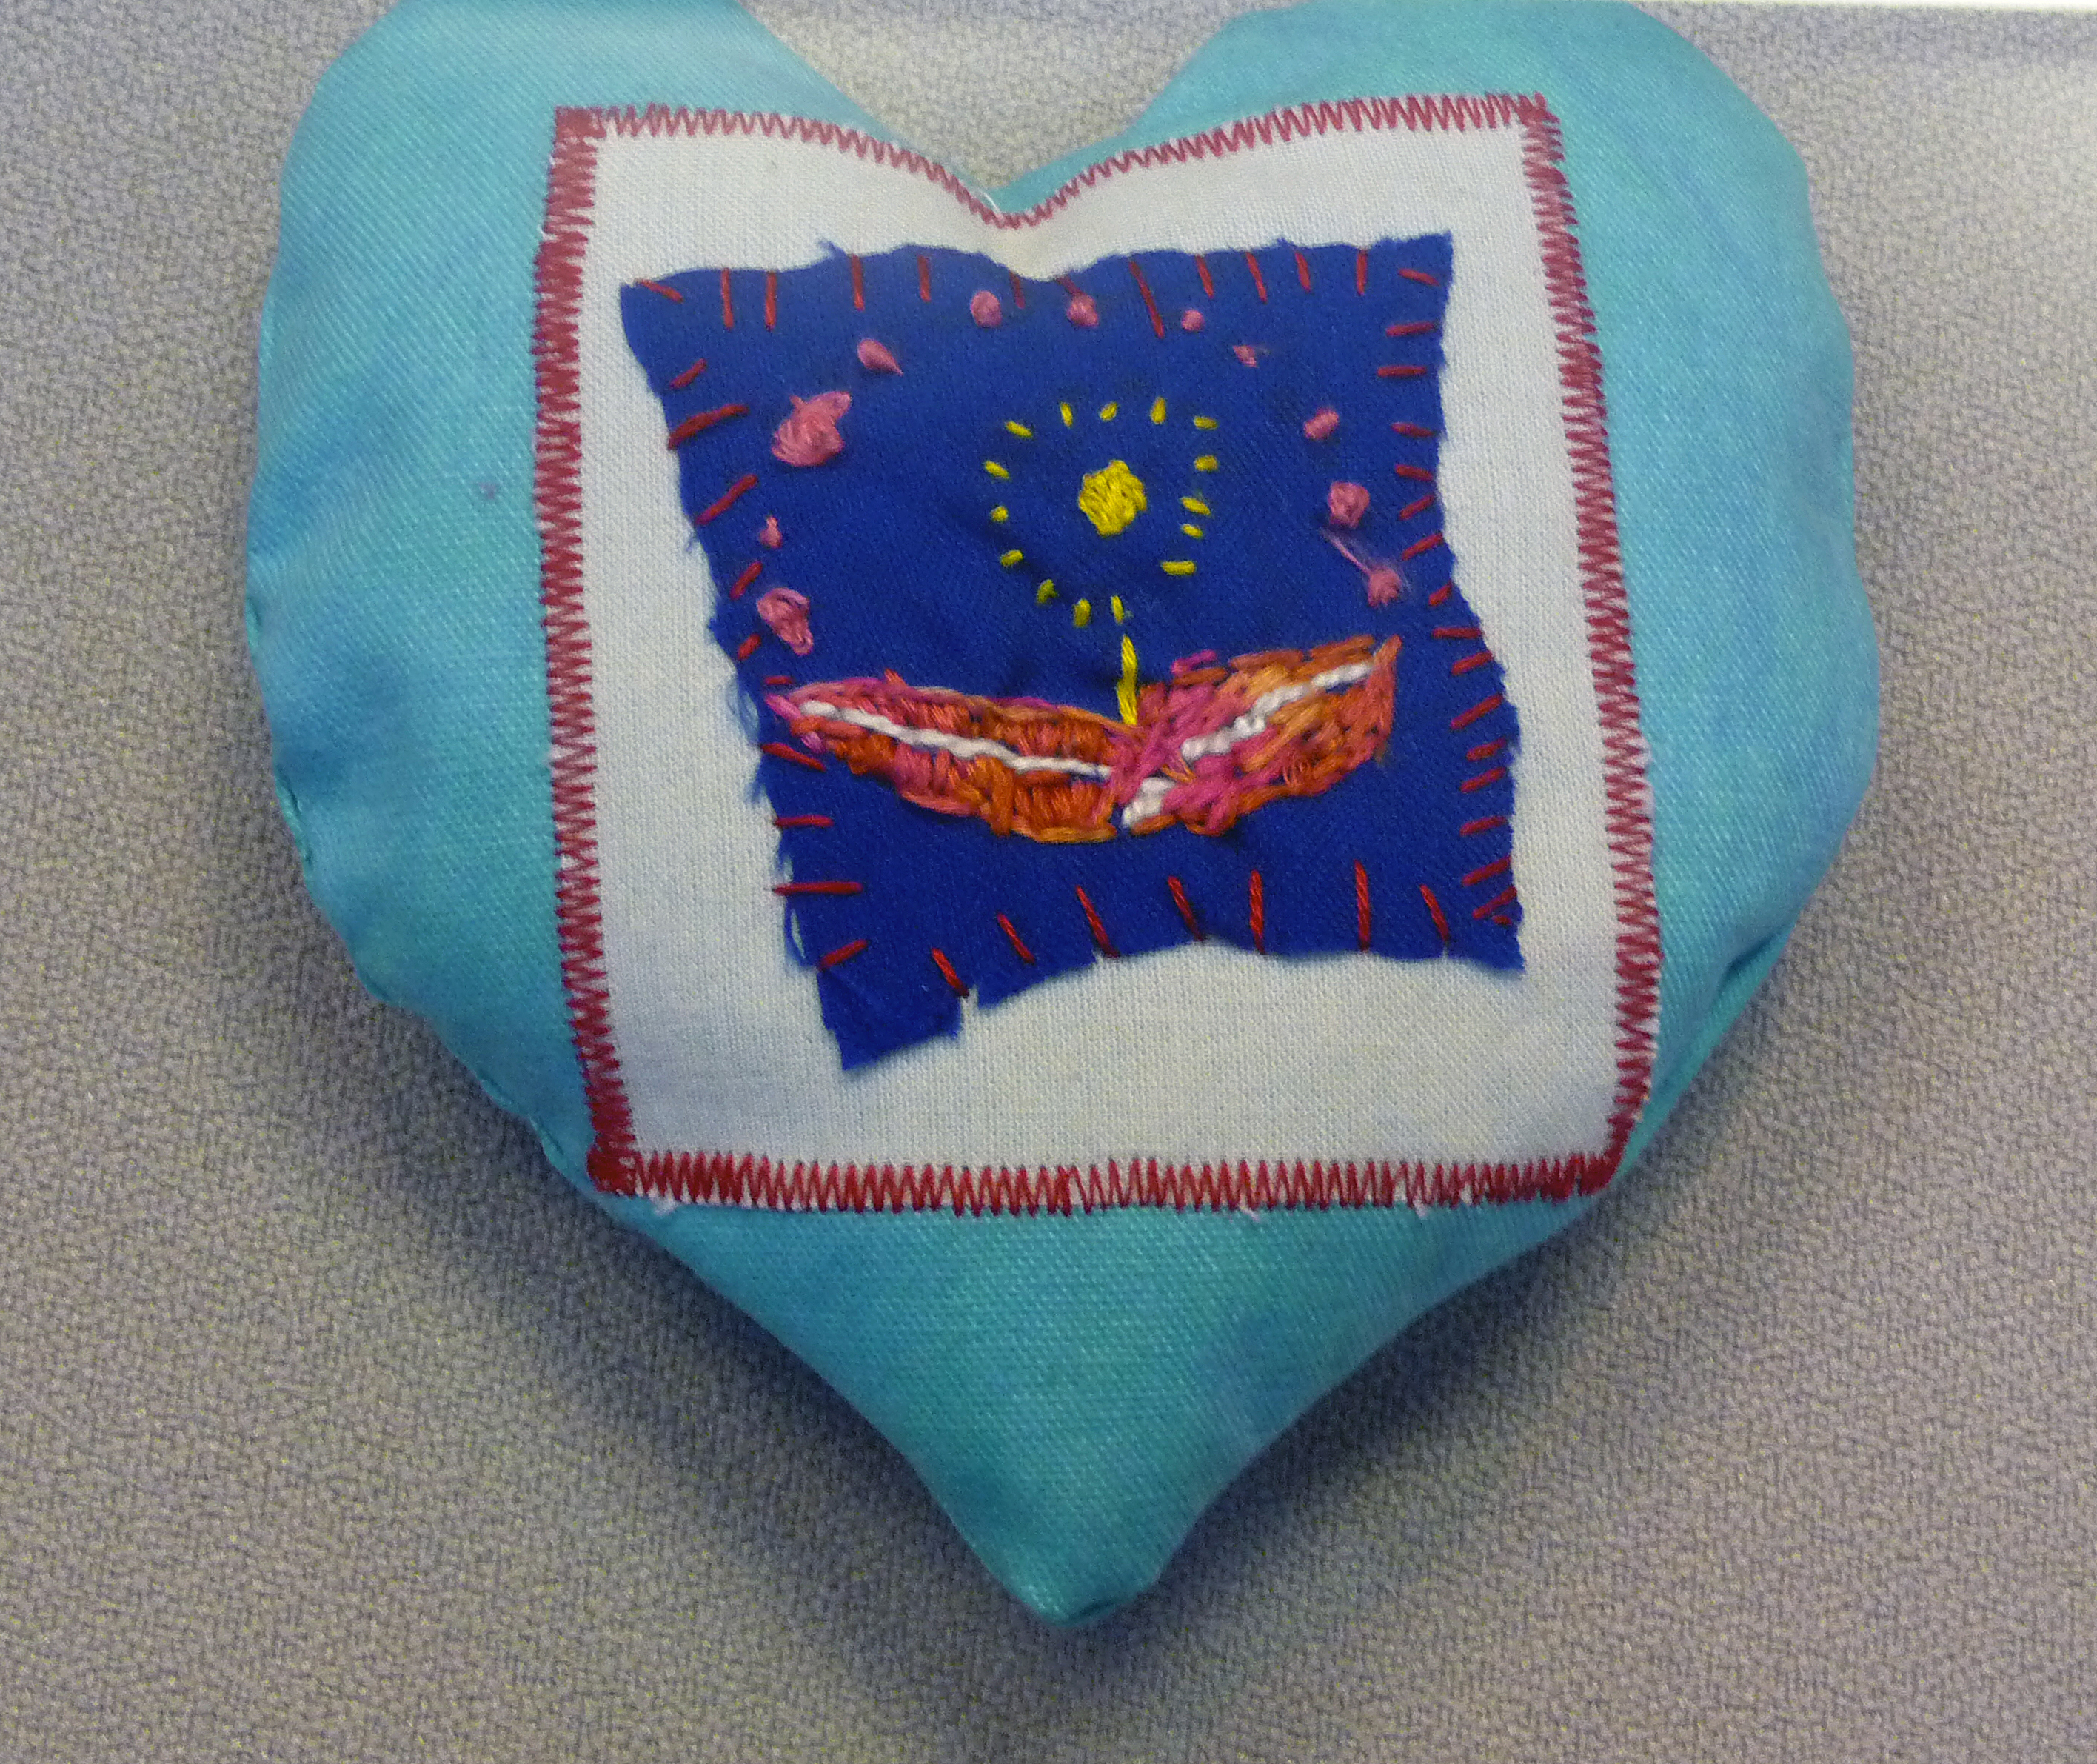 pincushion to commemorate World War 1 made by Hope, a Merseyside Young Embroiderer